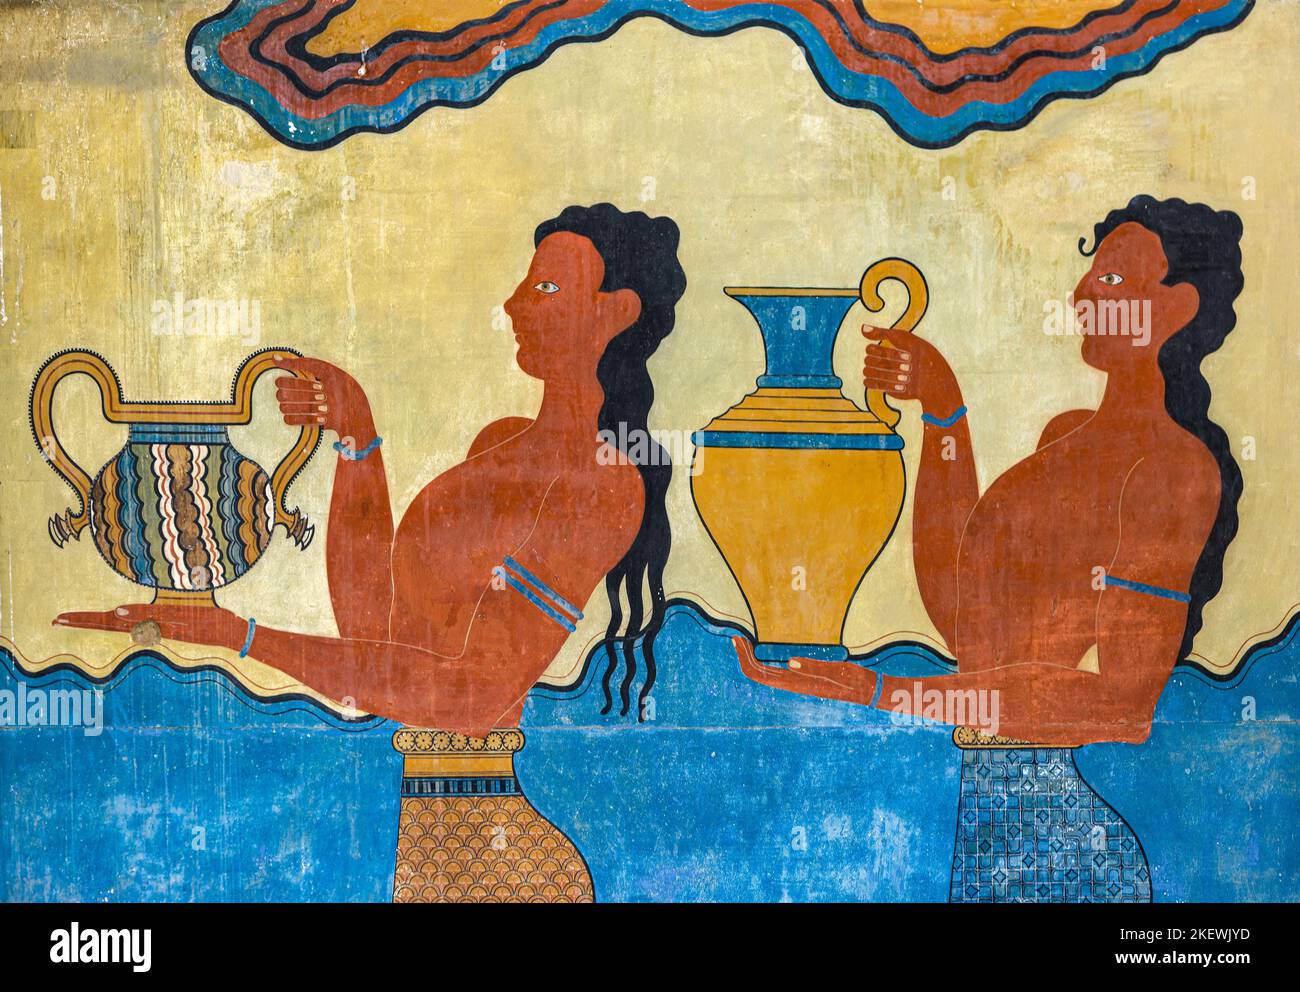 Fragment of the Procession Fresco at Knossos Palace in Heraklion, Crete, Greece Stock Photo